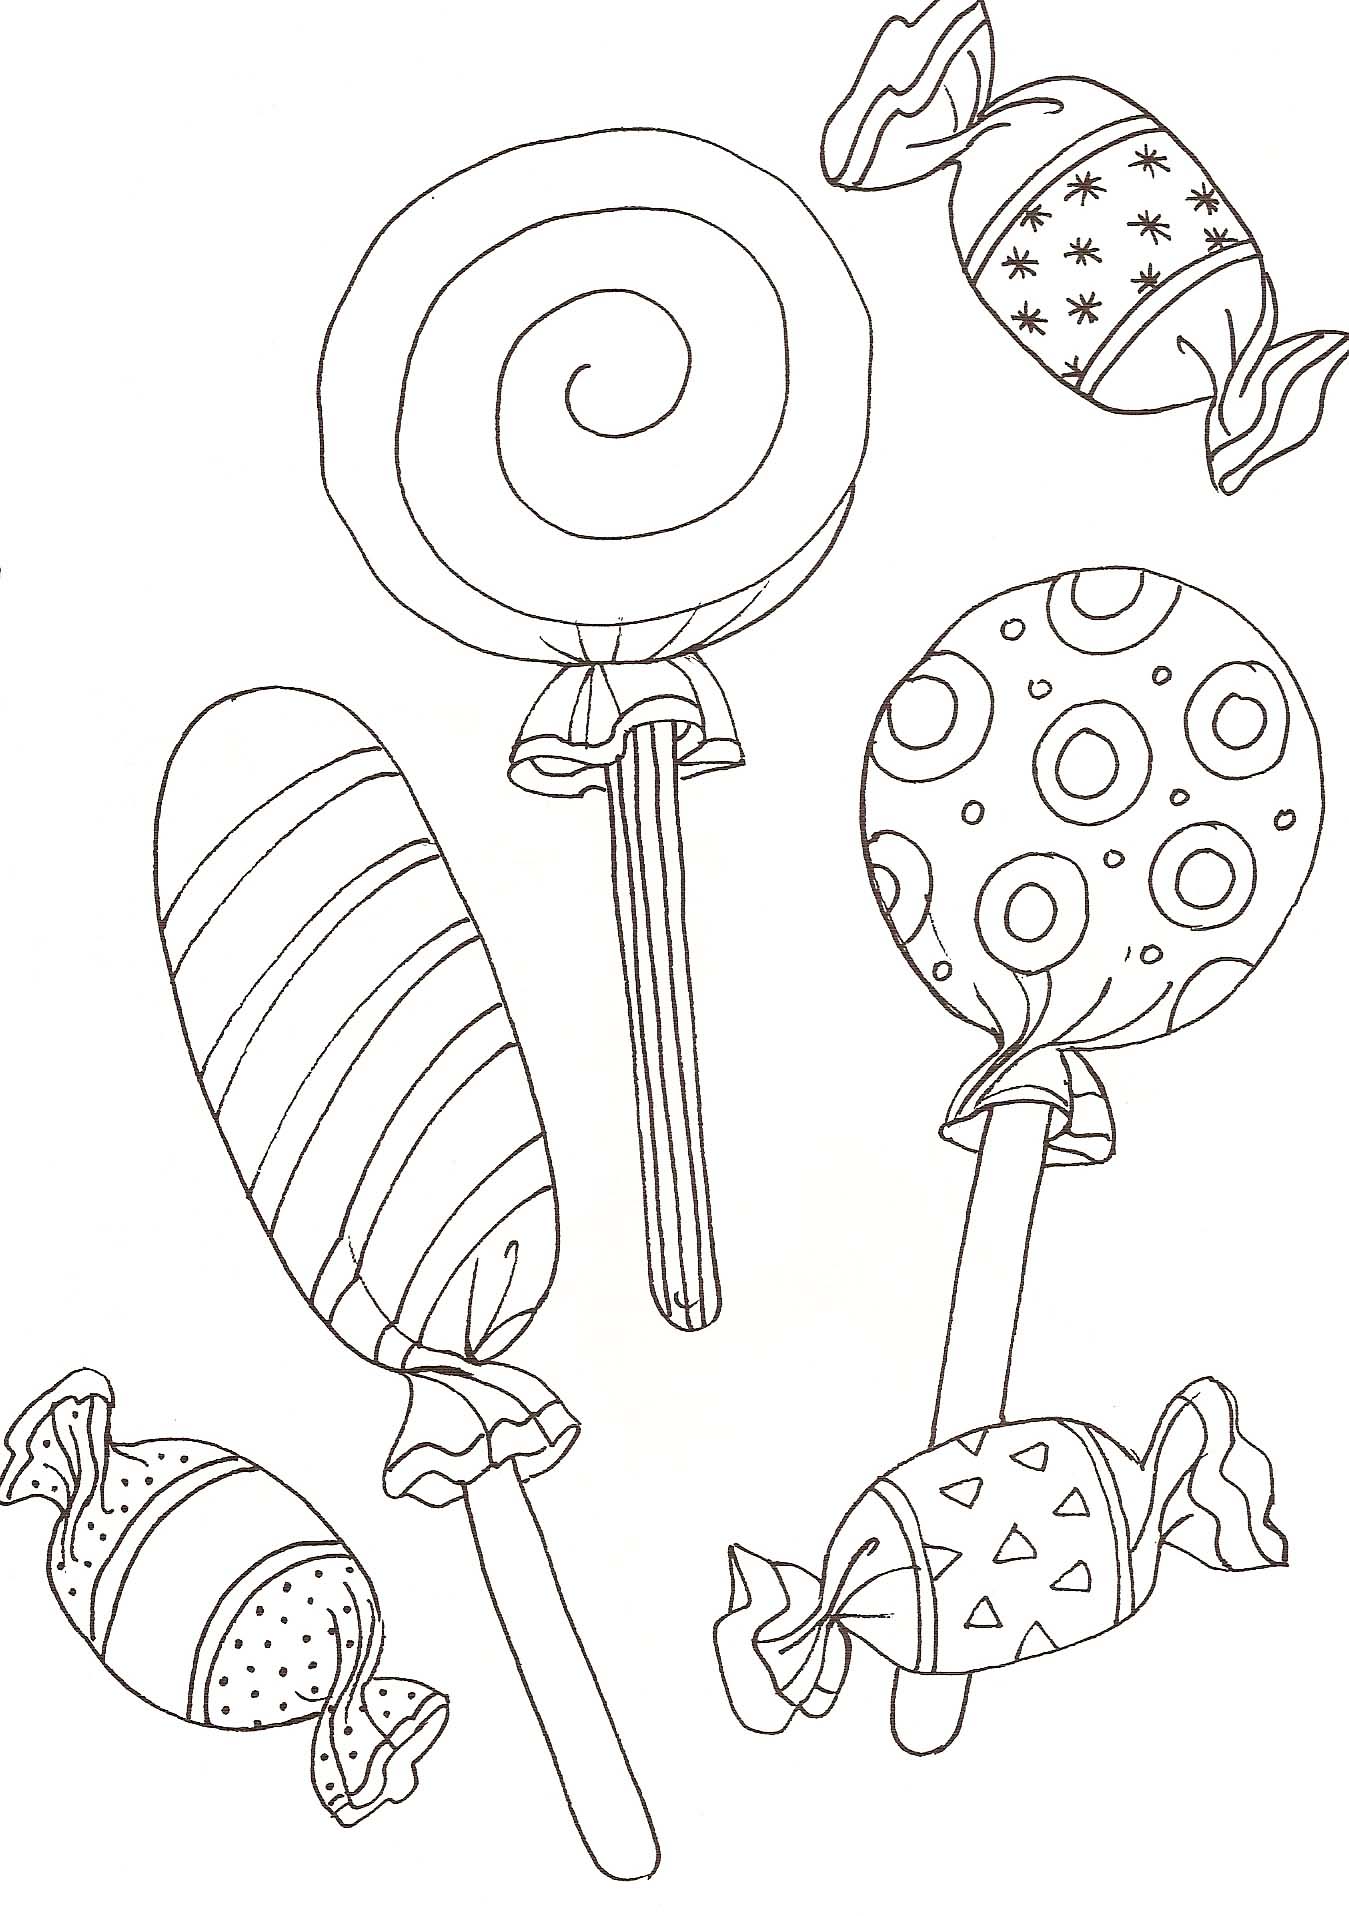 Download Lollipop Coloring Pages - Best Coloring Pages For Kids